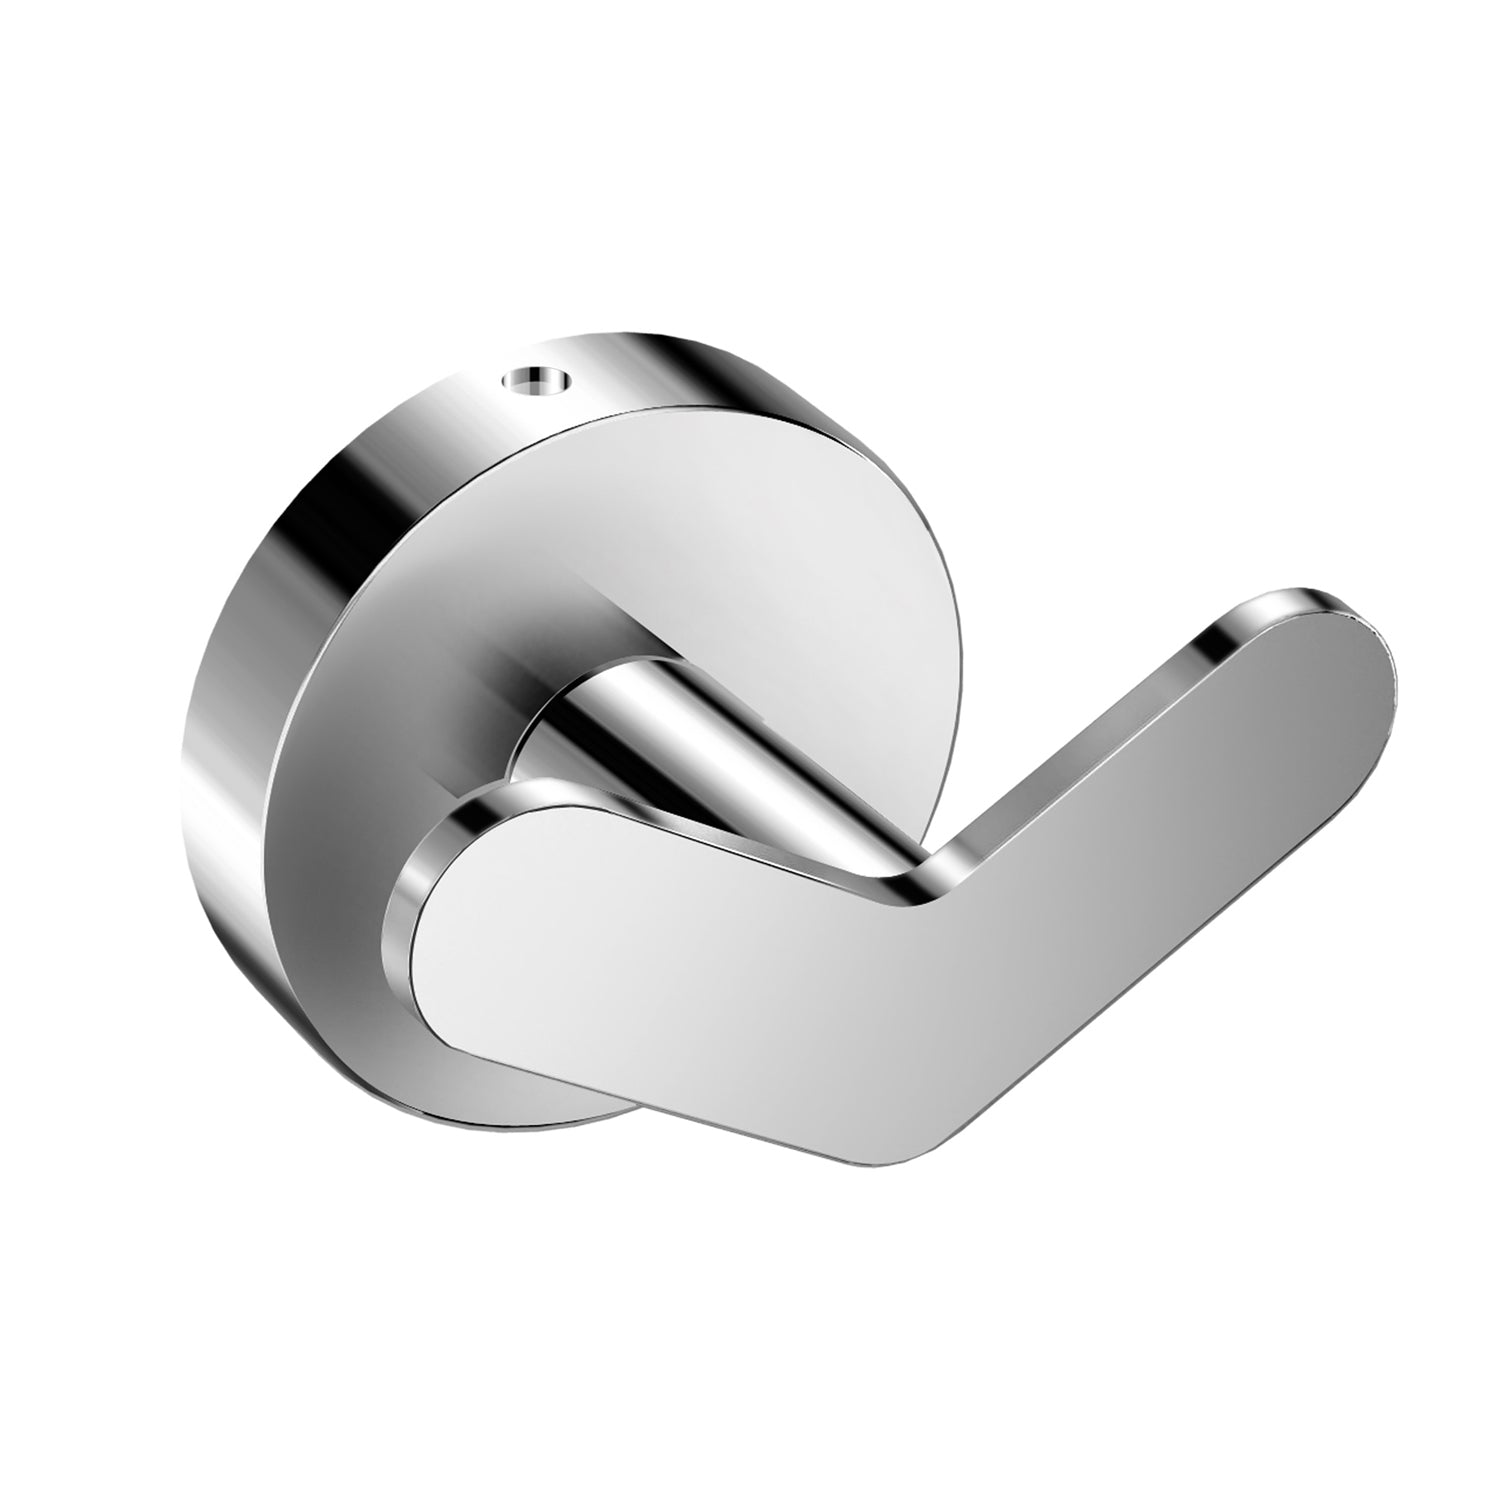 DAX Valencia Towel Hook, Wall Mount Stainless Steel, Brushed Finish, 2-9/16 x 2 x 1-9/16 Inches (DAX-GDC120122-BN)